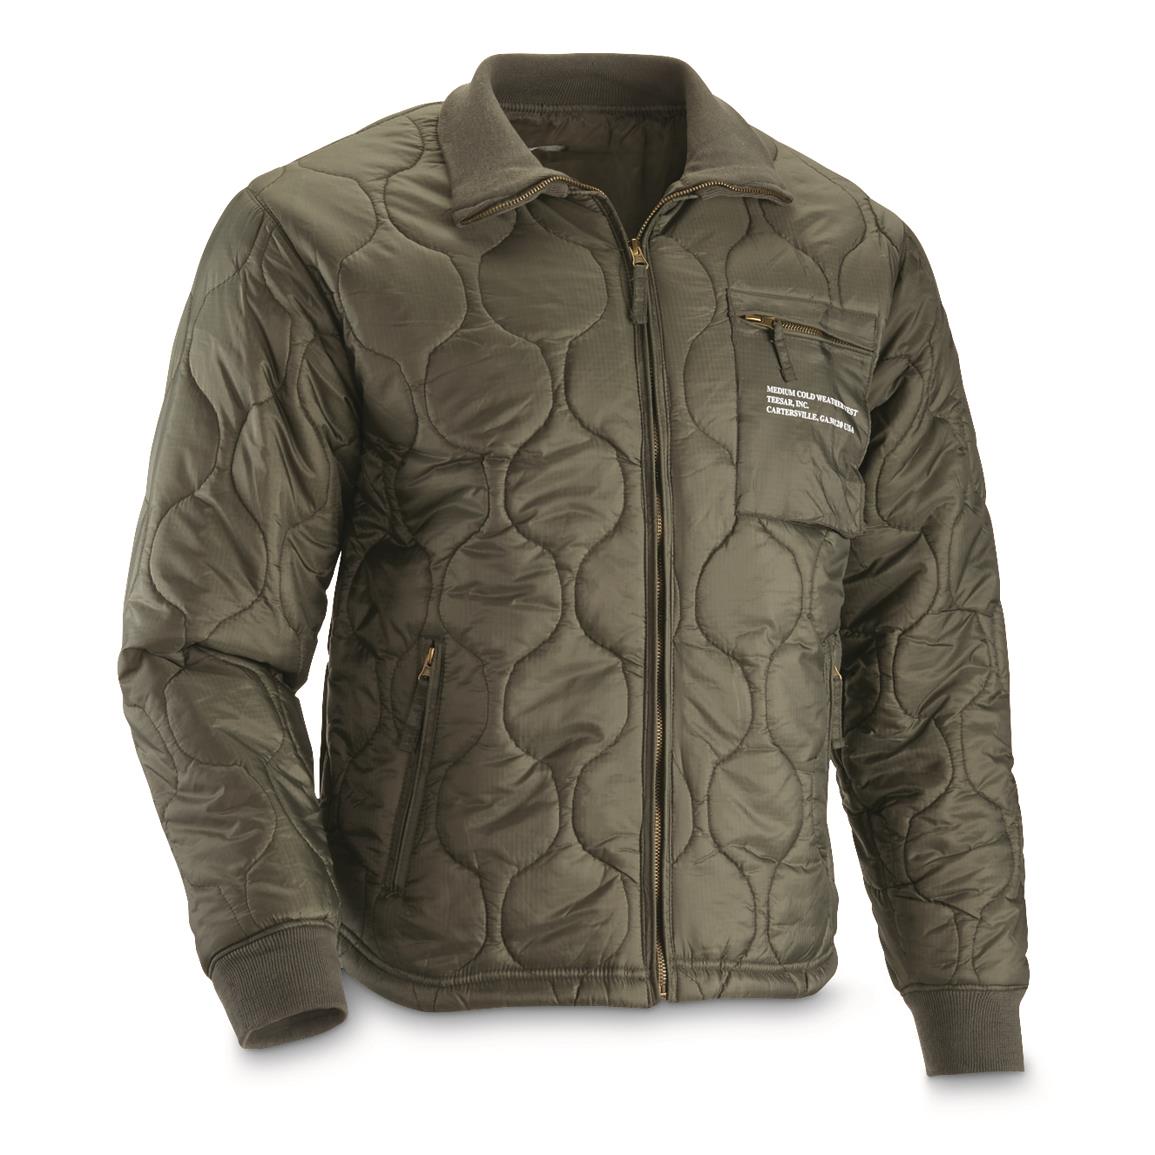 Mil-Tec Quilted Military Jacket, Foliage